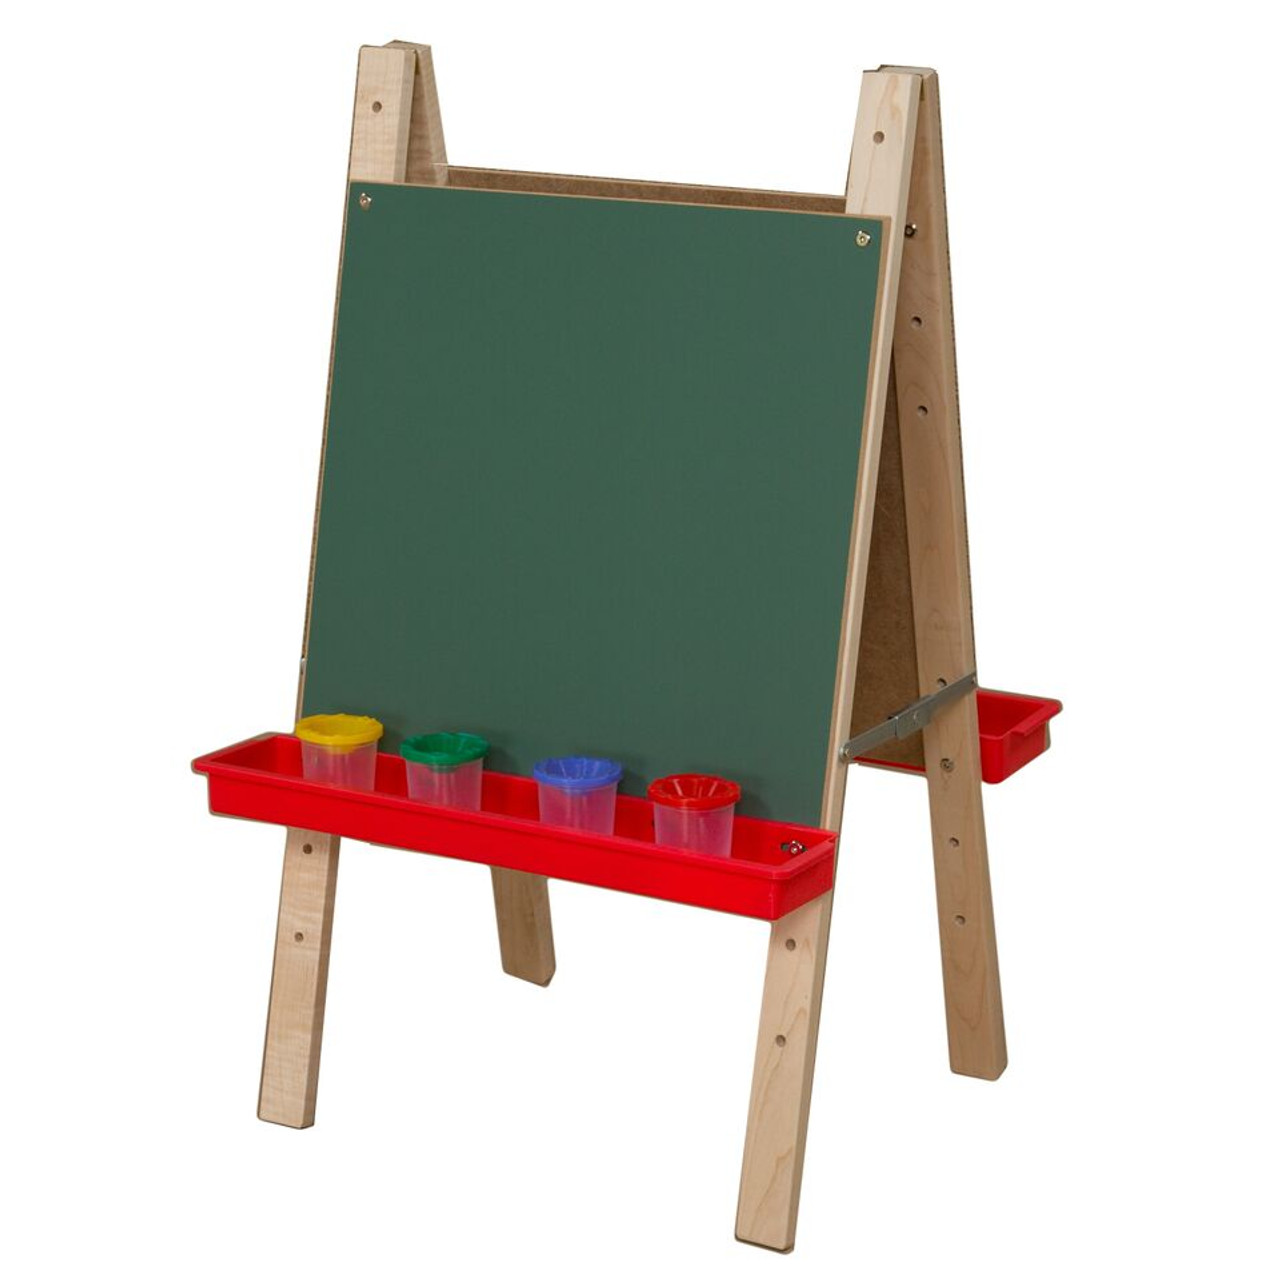 Classroom Easel, 4-Sided Adjustable Kid's Art Easel with Plywood Art  Surface and Red Trays